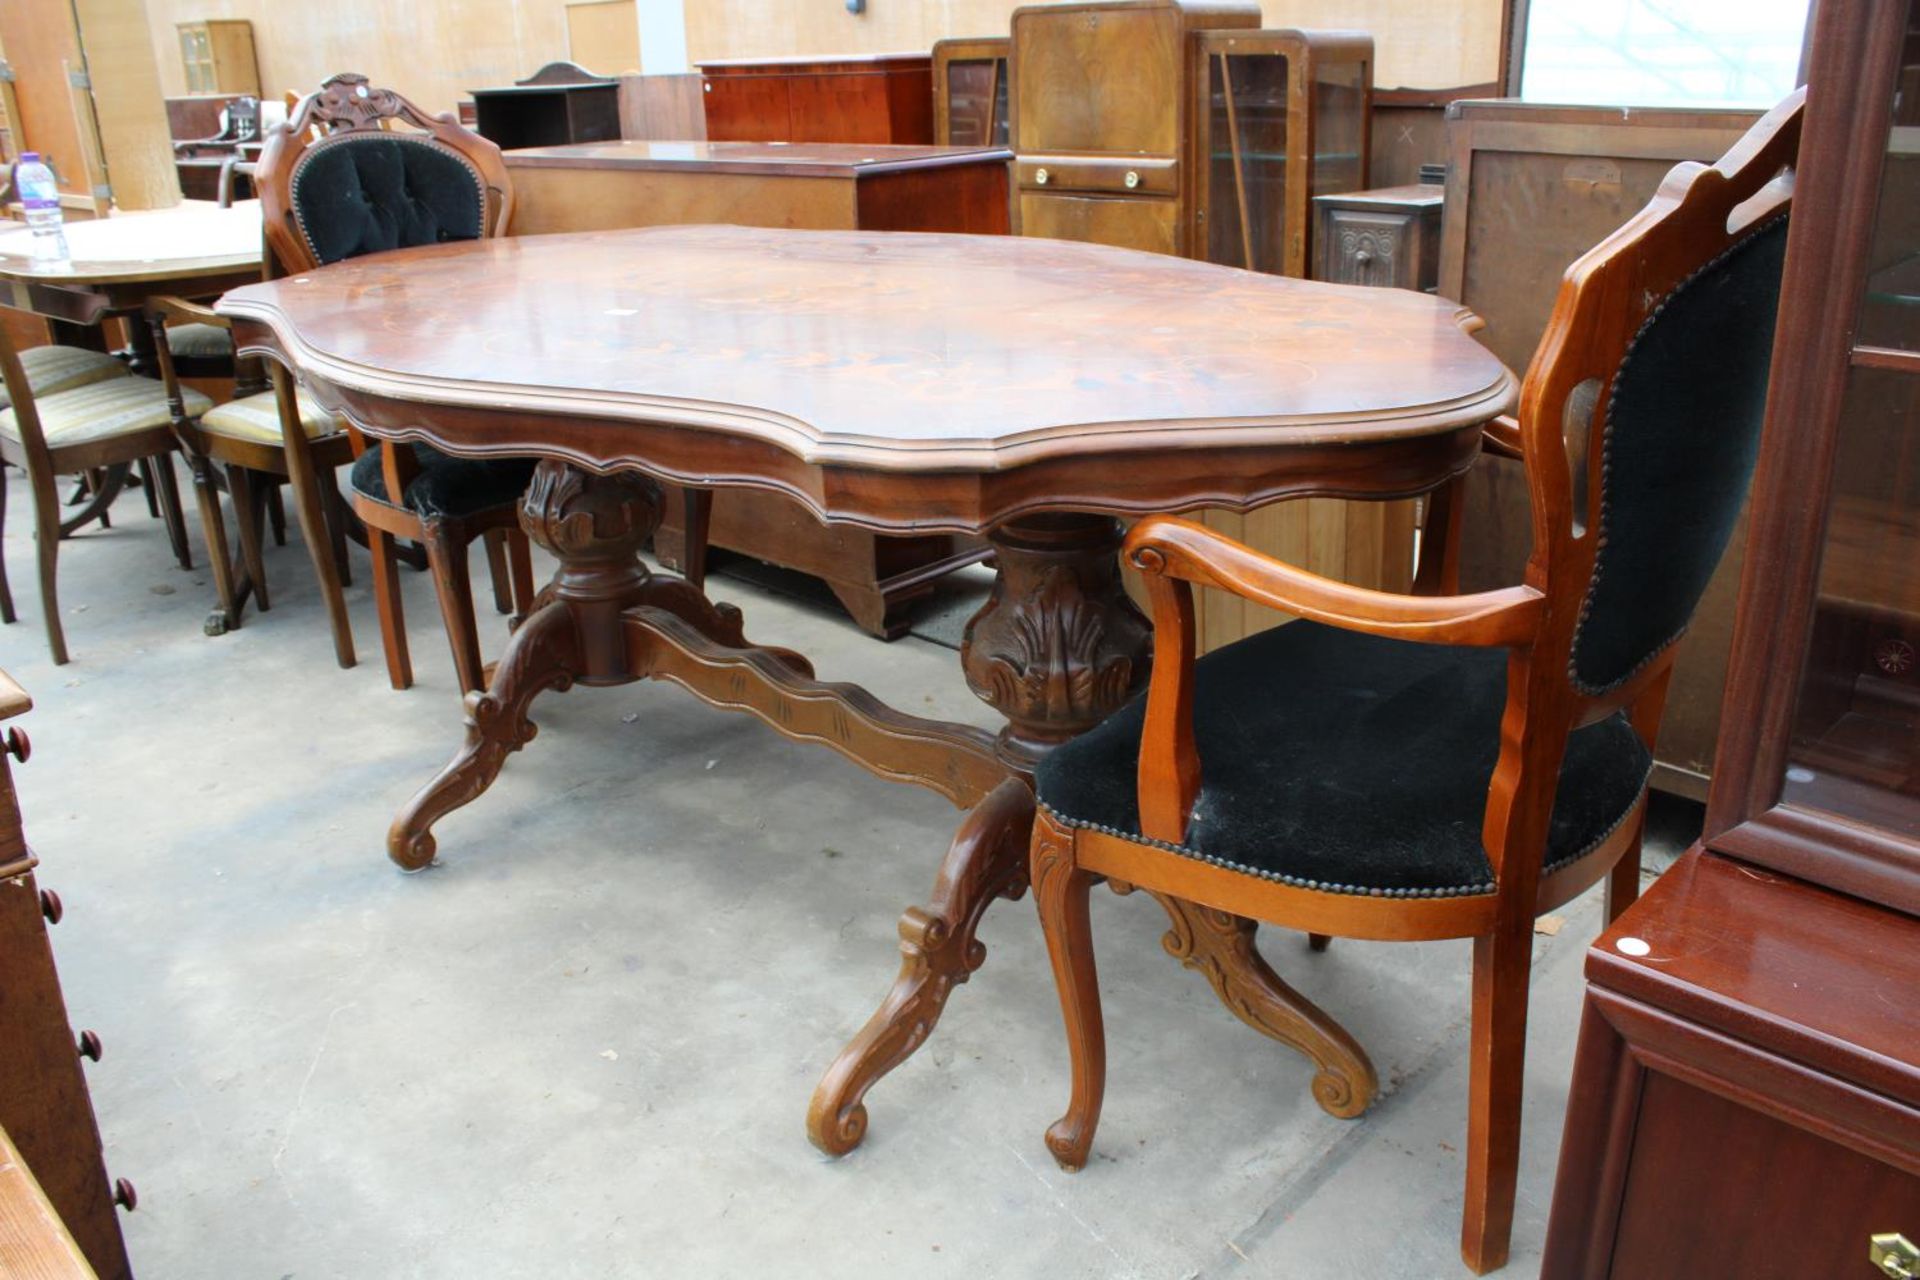 AN ITALIAN STYLE PEDESTAL DINING TABLE WITH MARQUETRY TOP AND A PAIR OF CARVER CHAIRS - Image 2 of 6